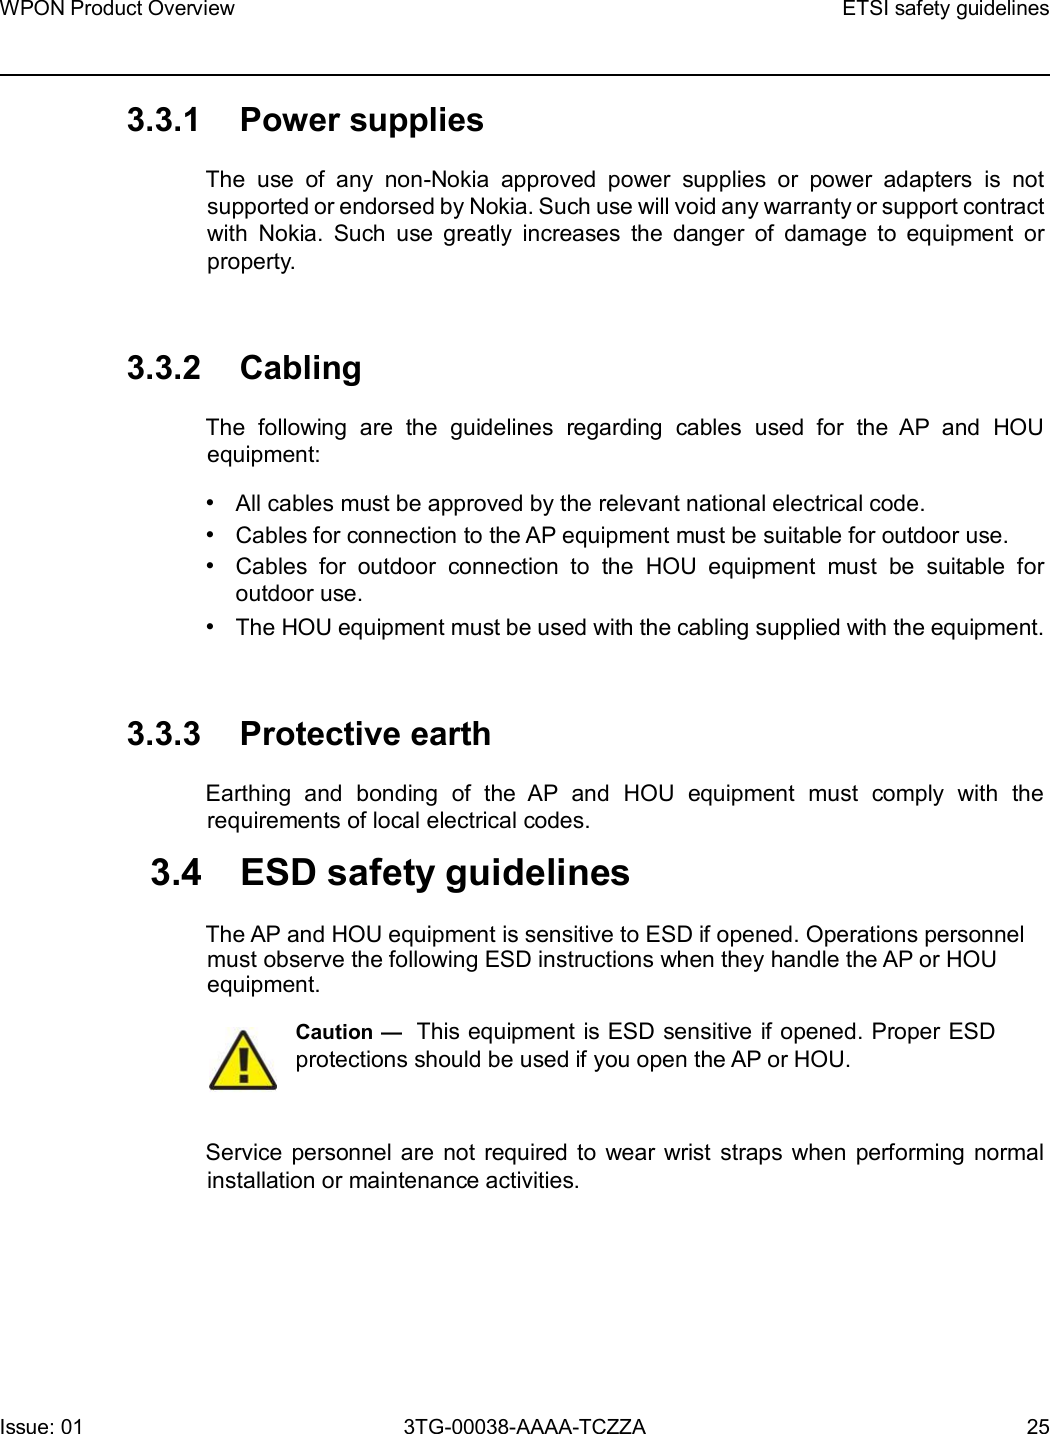 Page 25 of Nokia Bell 7577WPONAPAC WPON User Manual WPON Product Overview